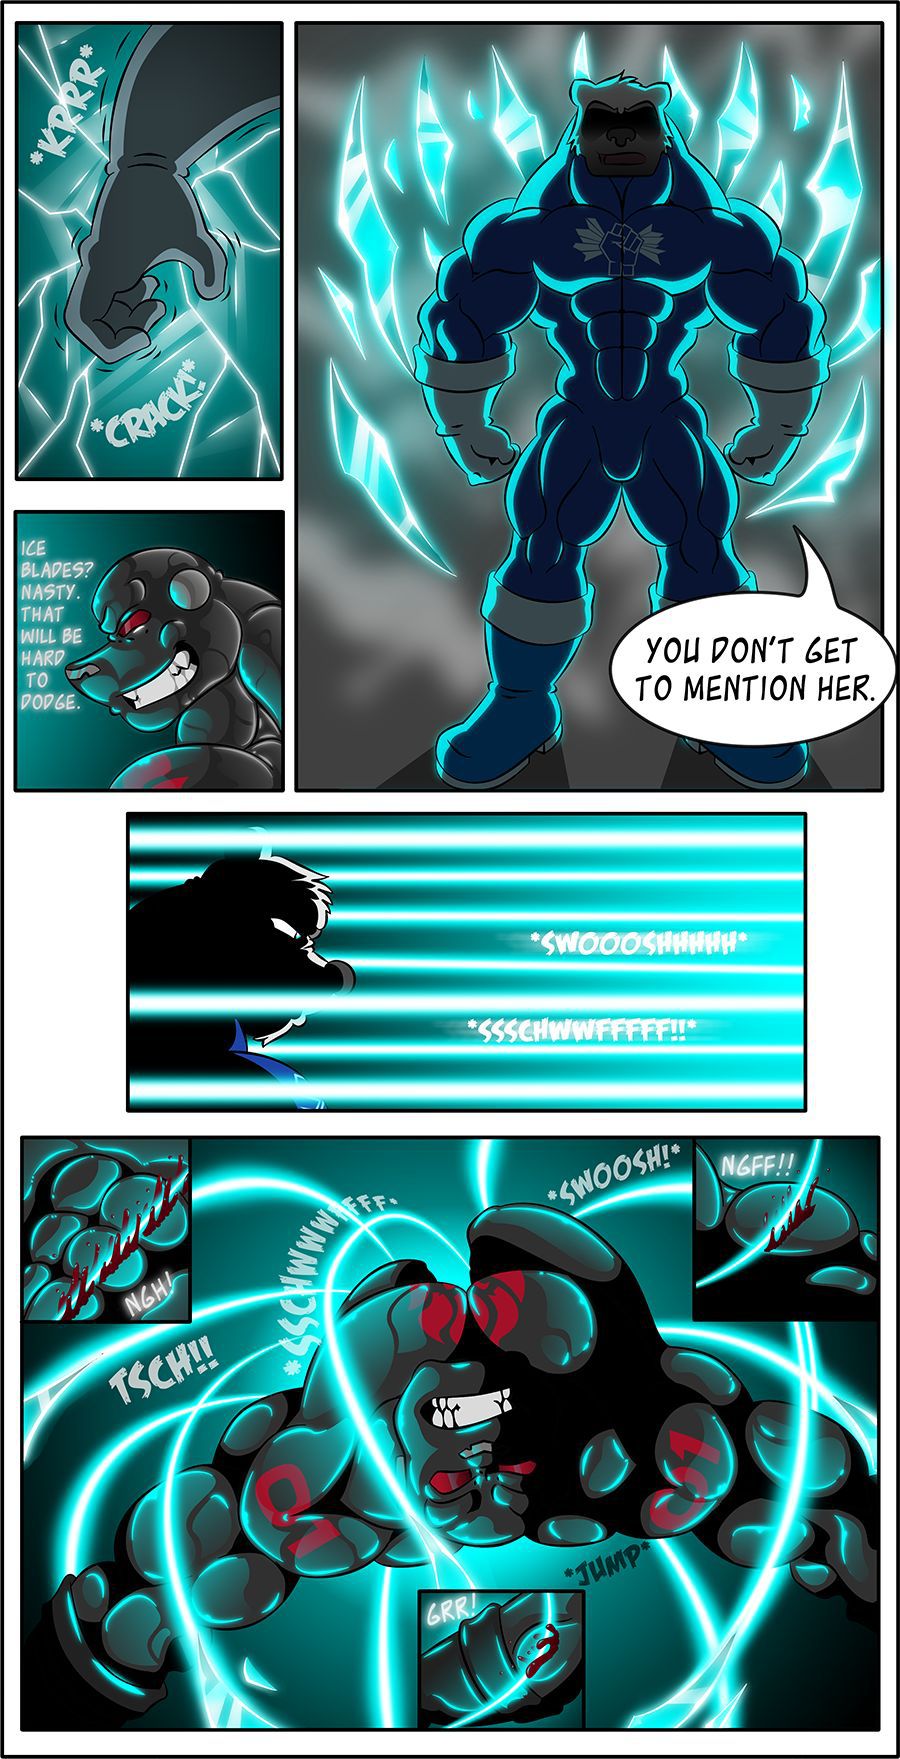 [Rubberbuns] FROSTBITE [ON GOING] 39